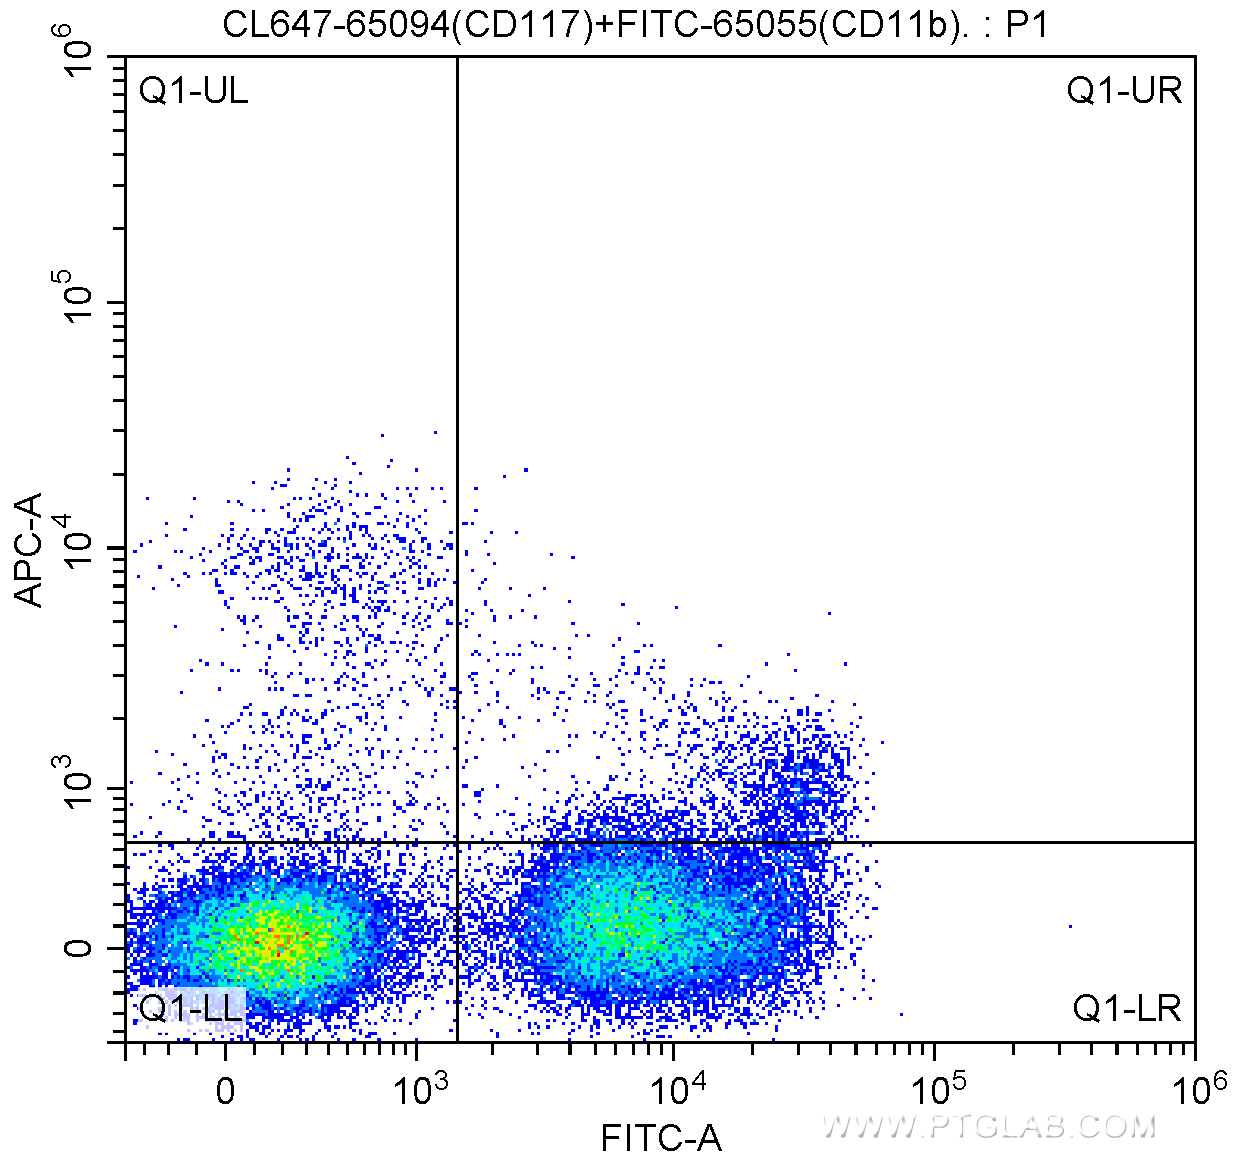 FC experiment of mouse bone marrow cells using CL647-65094